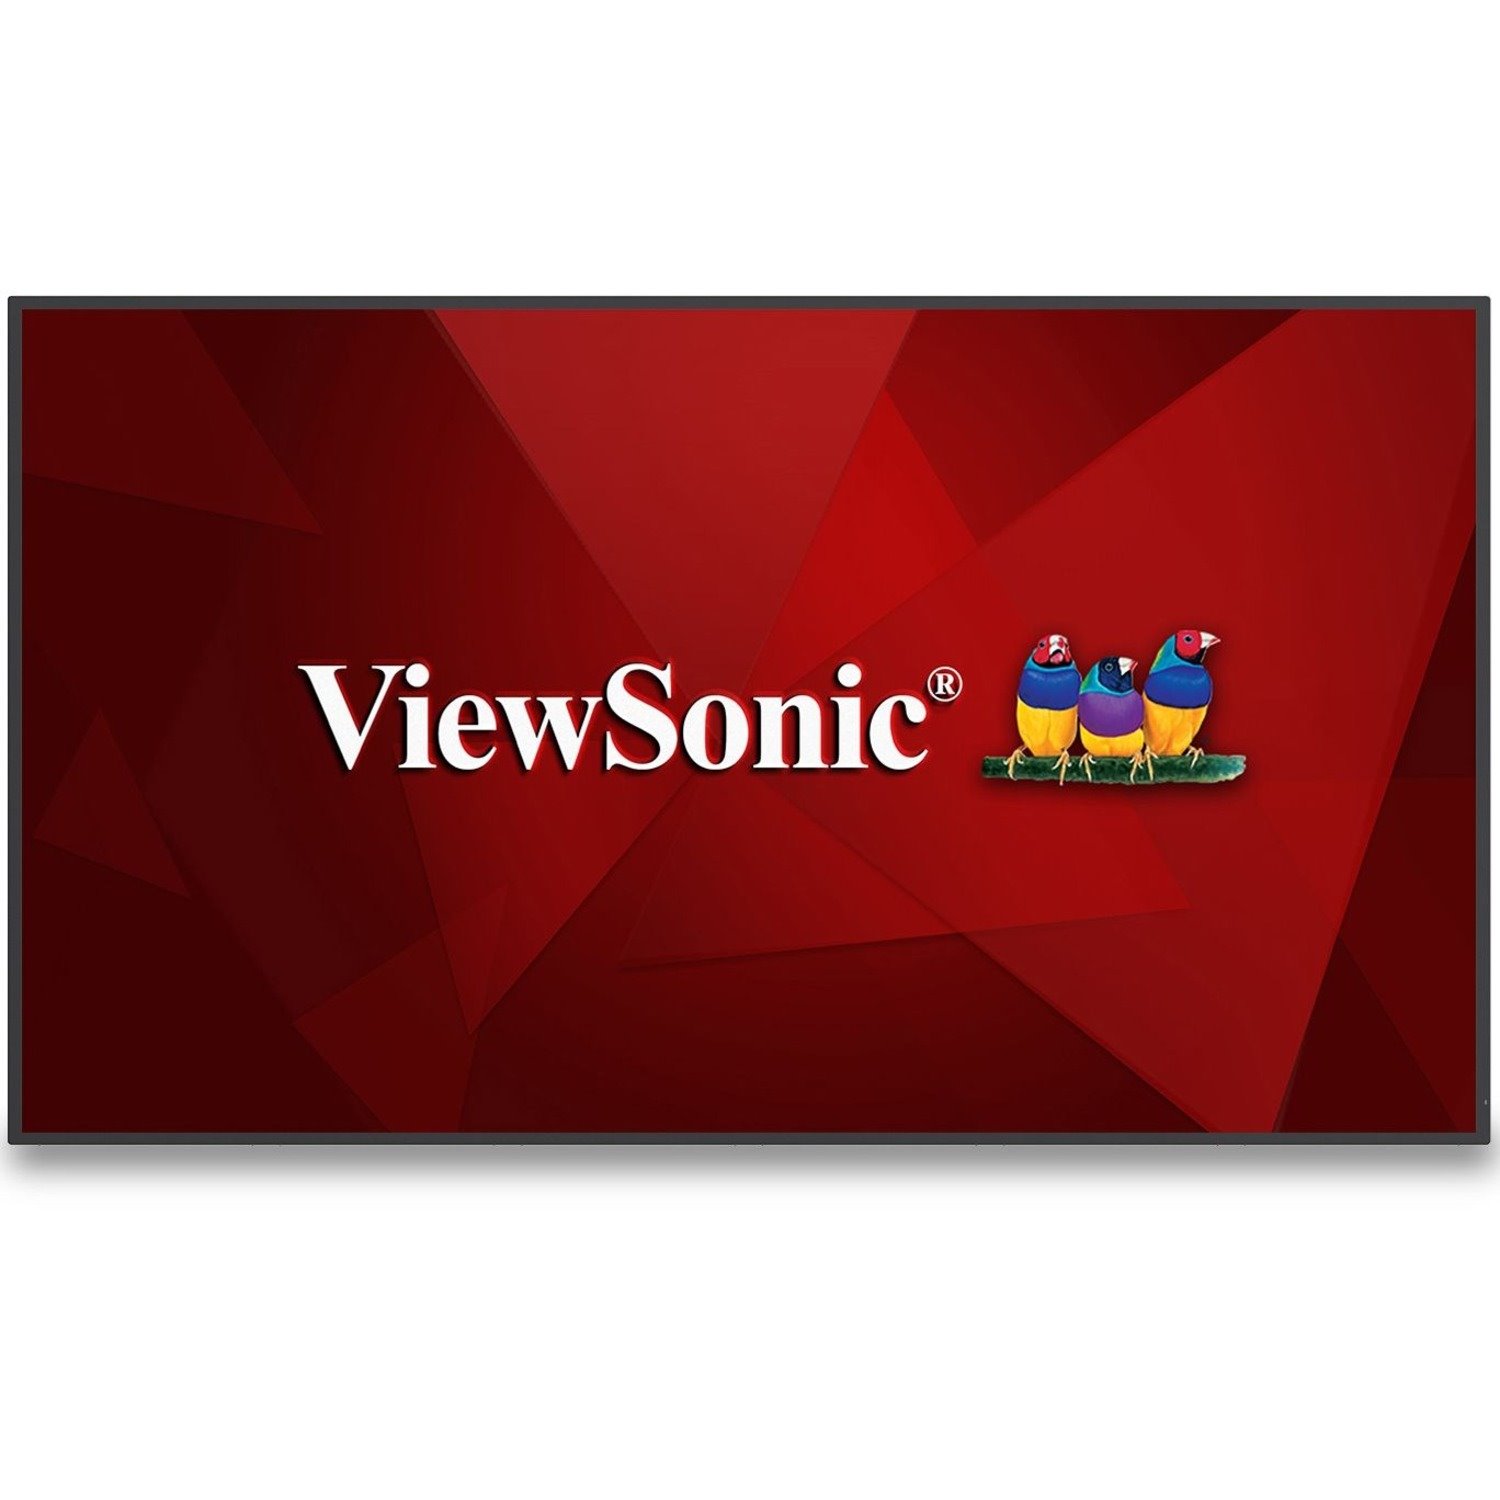 ViewSonic CDE7530 75" 4K UHD Wireless Presentation Display 24/7 Commercial Display with Portrait Landscape, HDMI, USB, USB C, Wifi/BT Slot, RJ45 and RS232